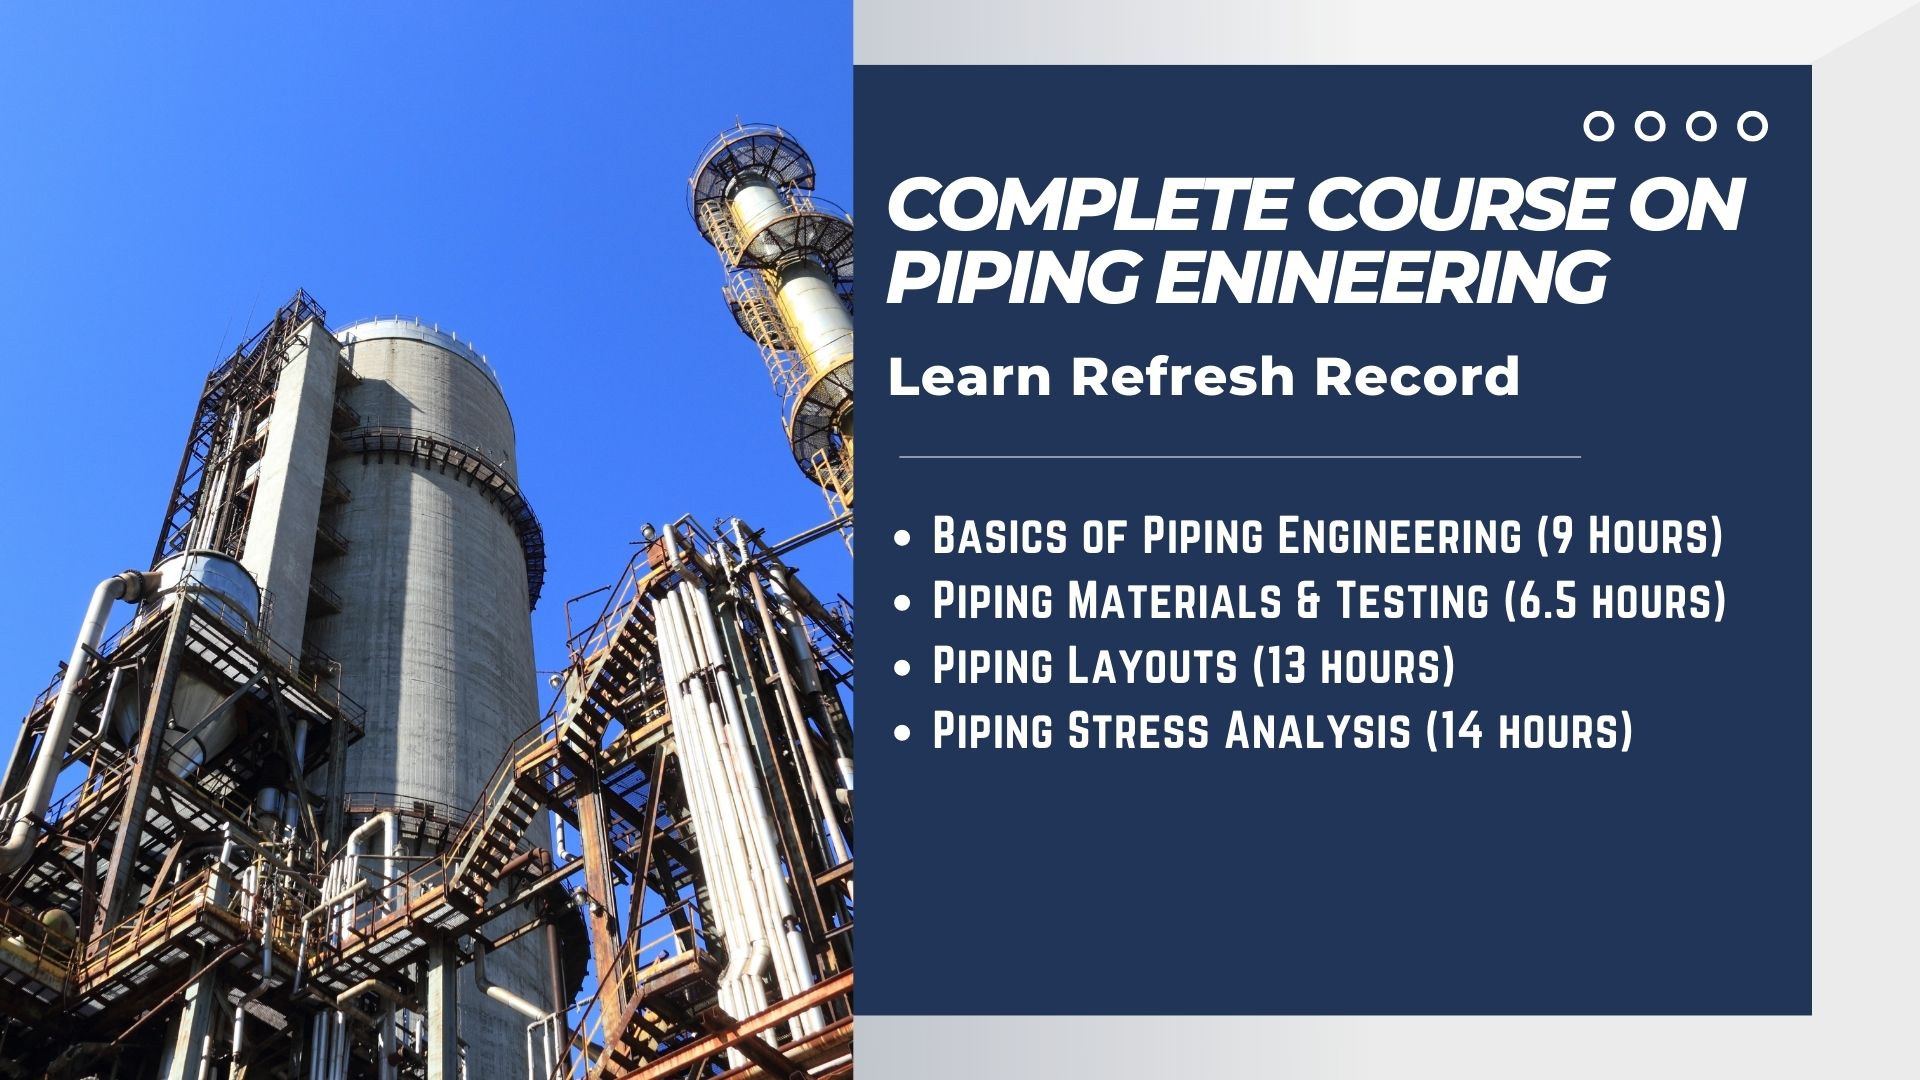 Complete online course on Piping Engineering